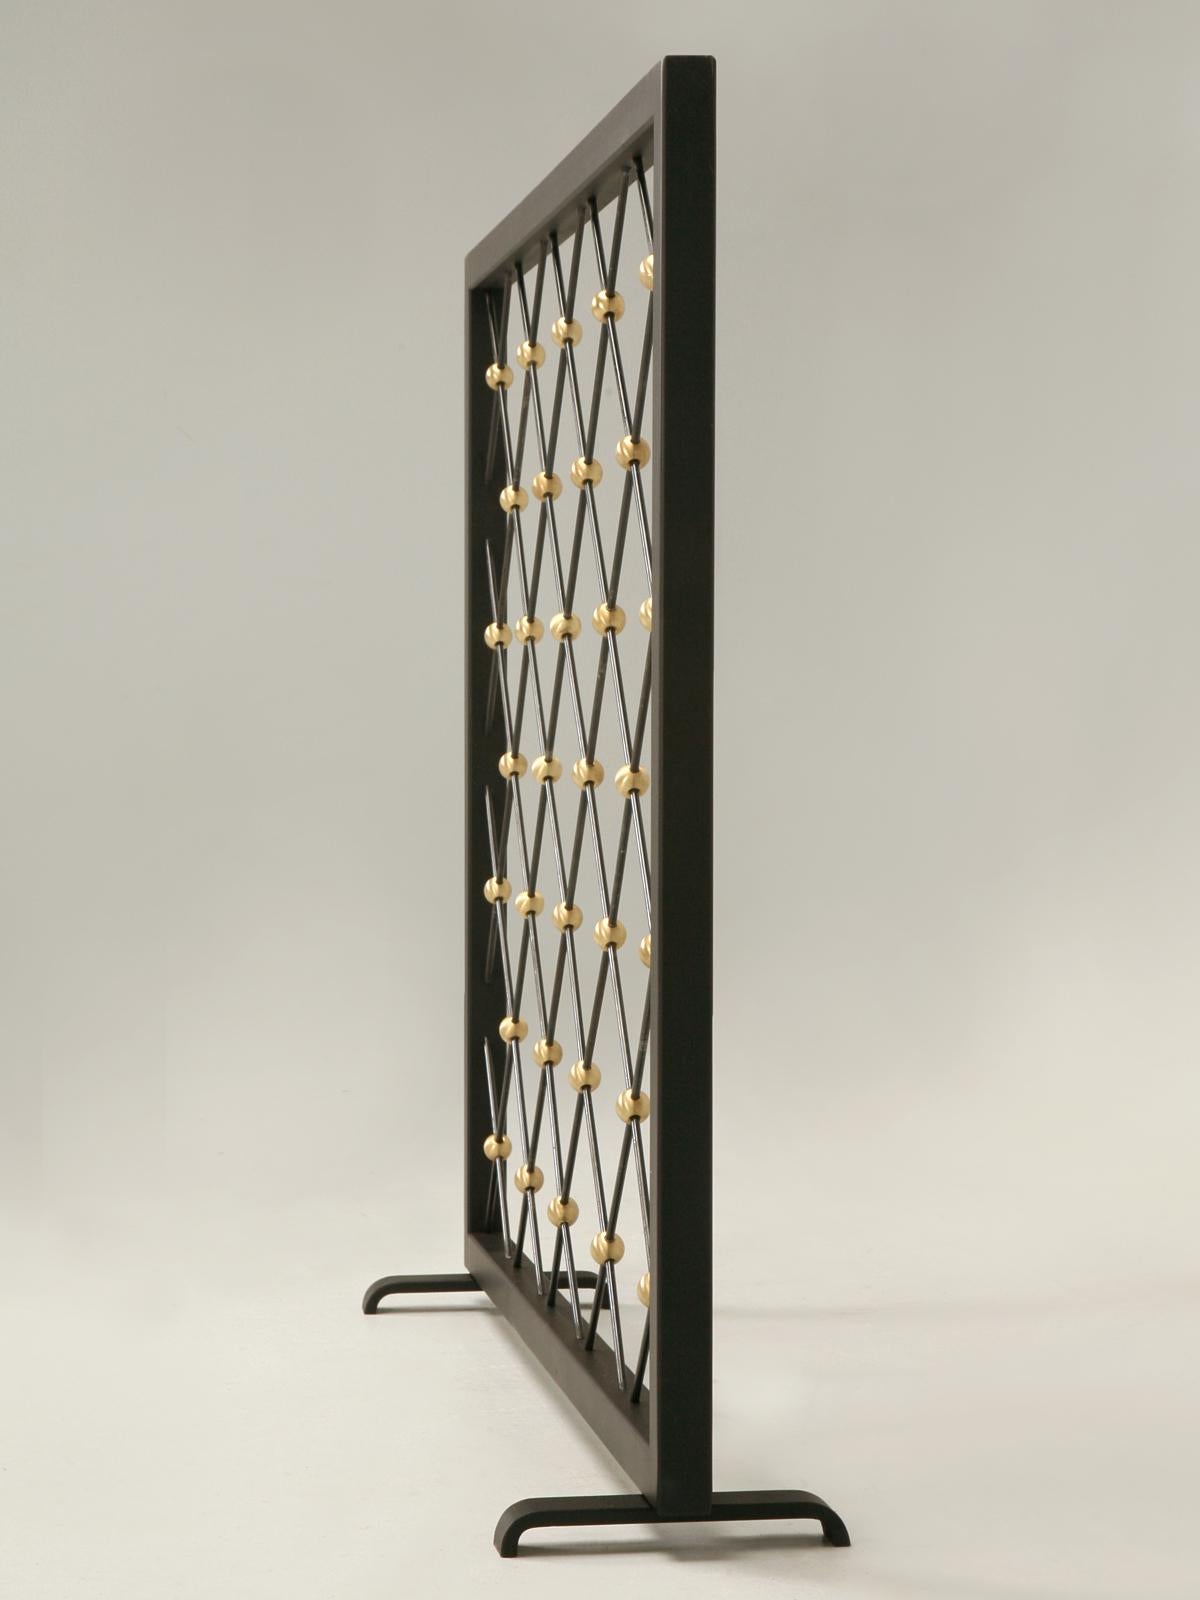 Heavy steel and brass Mid-Century Modern style fireplace screen, that our old plank workshop builds to order in your specific dimensions and finish. We also custom build other Mid-Century Modern fireplace screens and all are listed on 1stdibs.